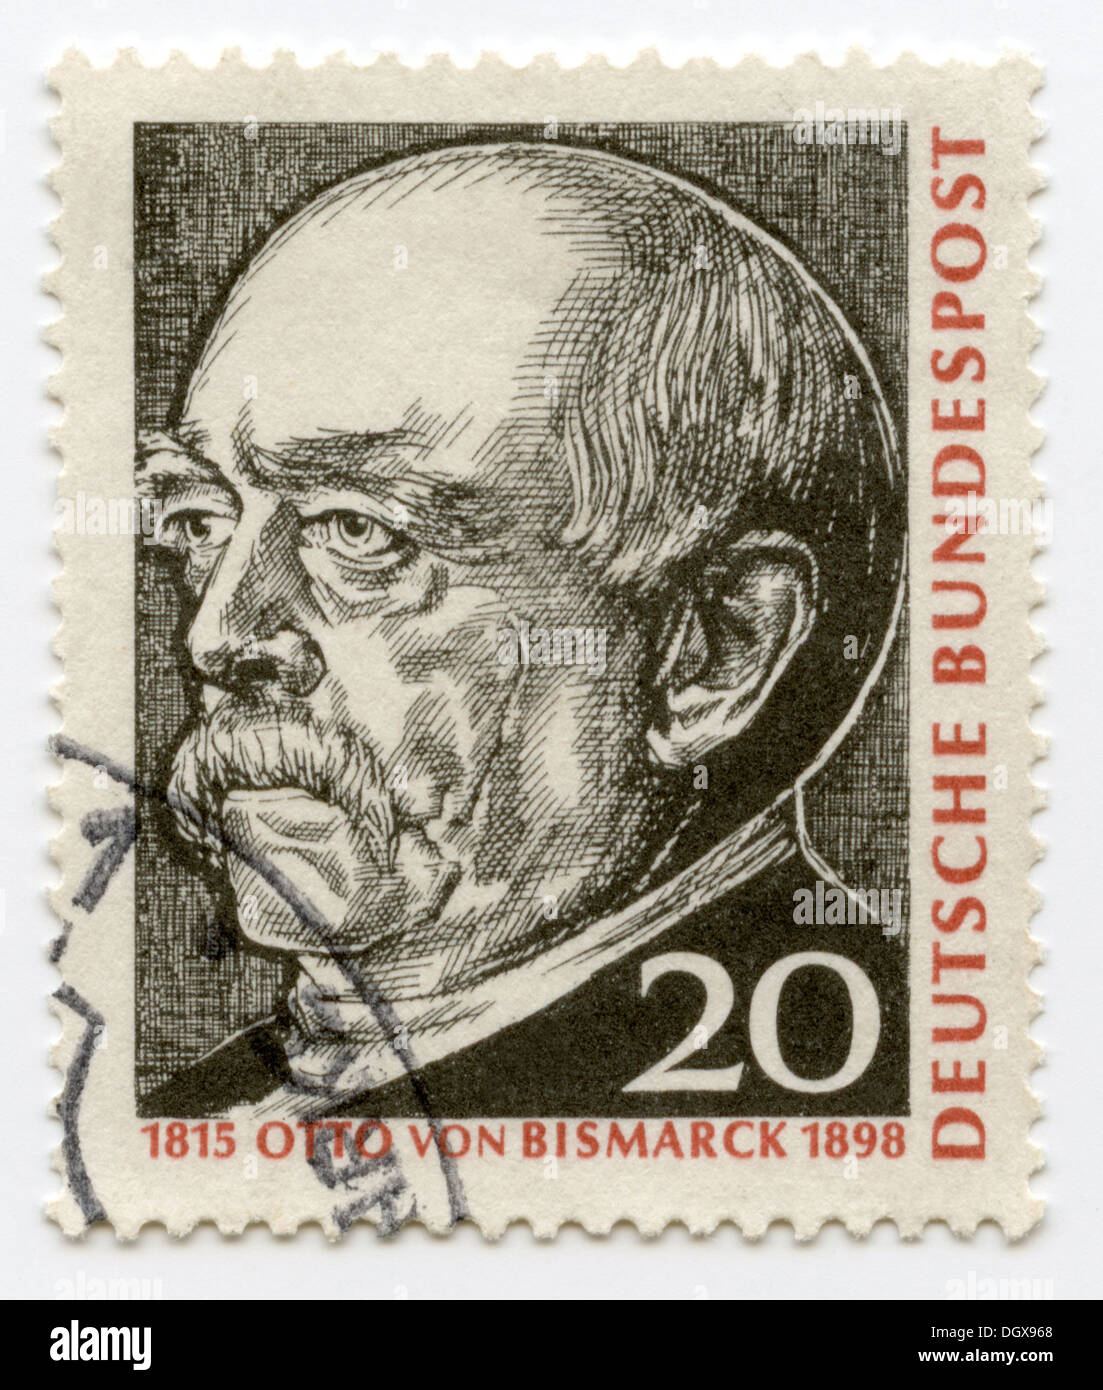 Germany postage stamp depicting Otto von Bismarck,  a Prussian statesman in 1800's Stock Photo